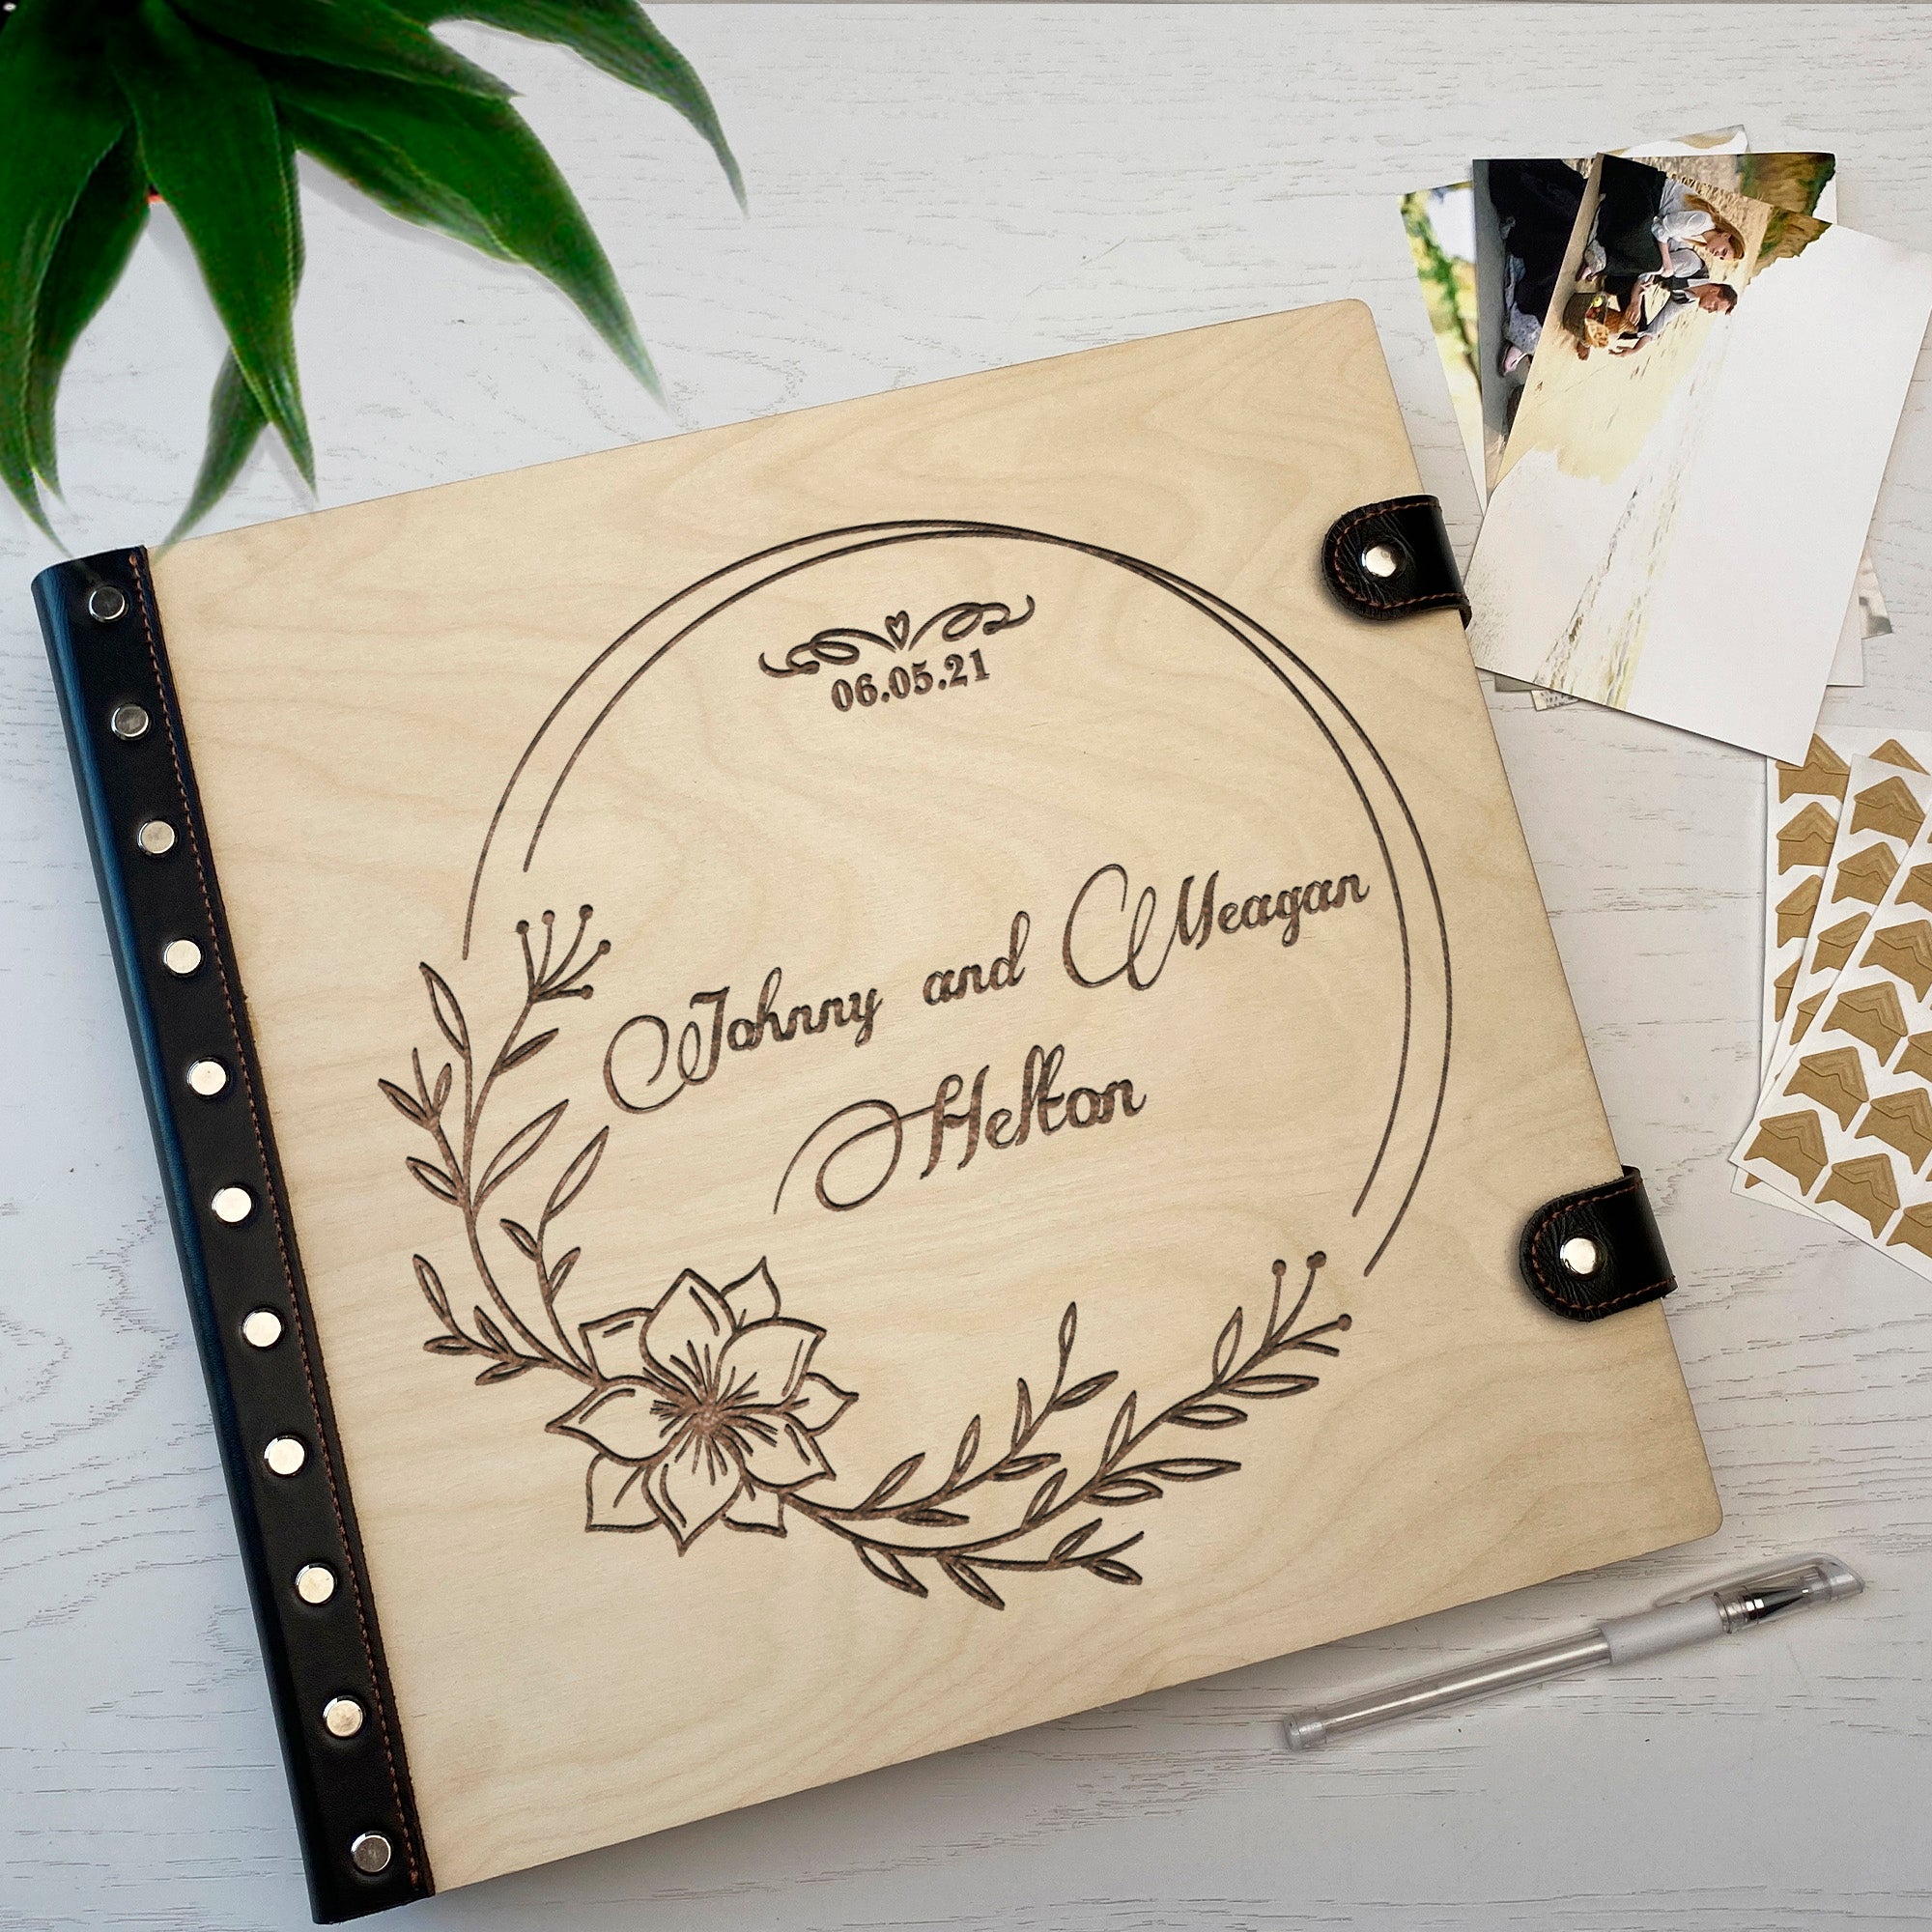 Personalized photo album with leather cover and Flowers engraving